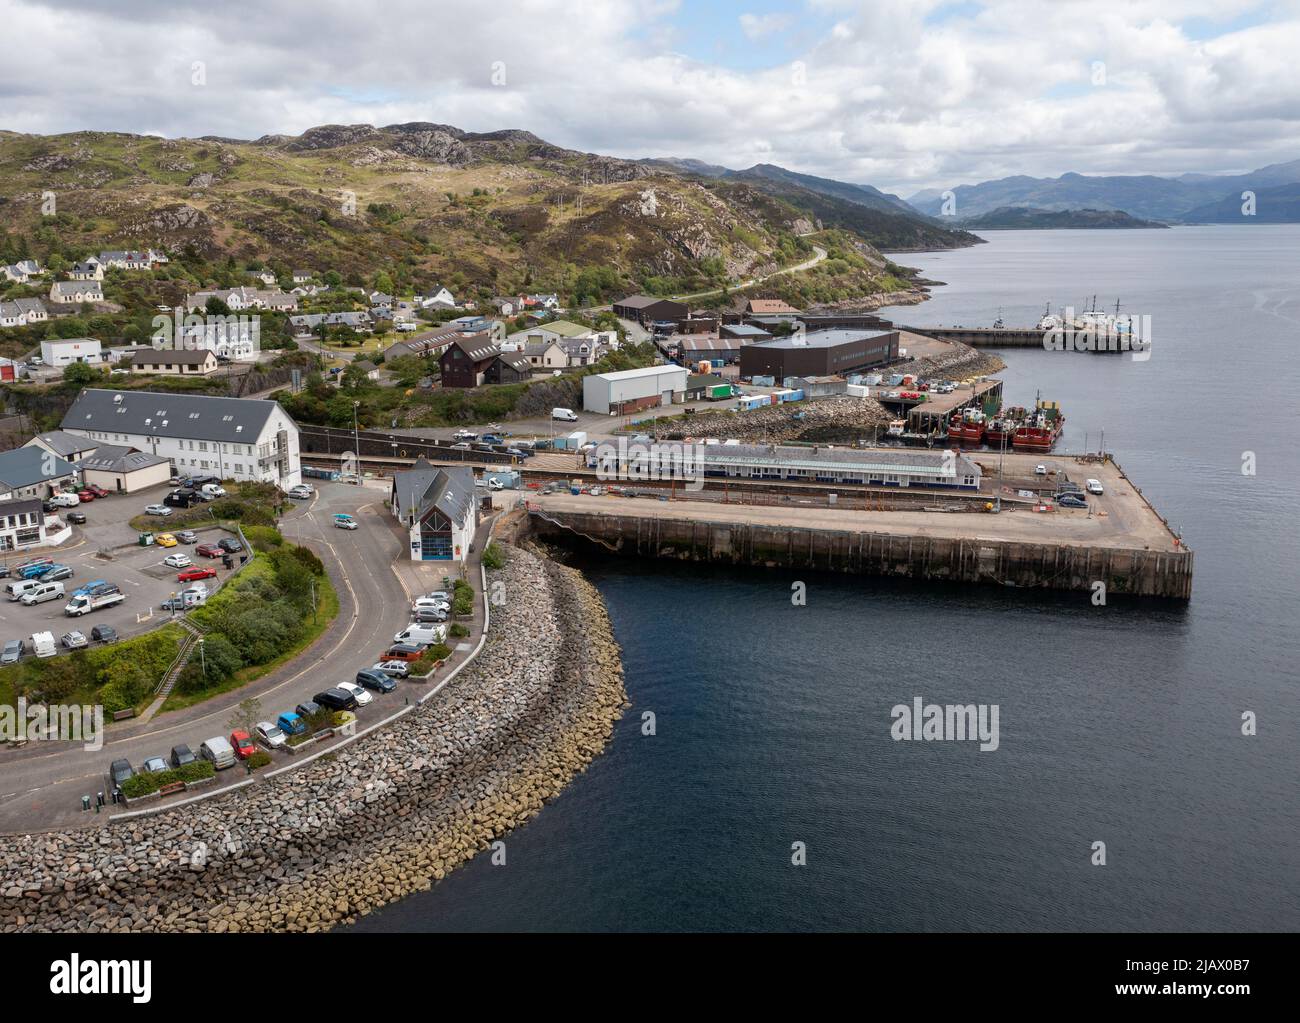 Aerial view of the Kyle of Lochalsh, Ross, Skye and Lochaber district, Scotland, United Kingdom. Stock Photo